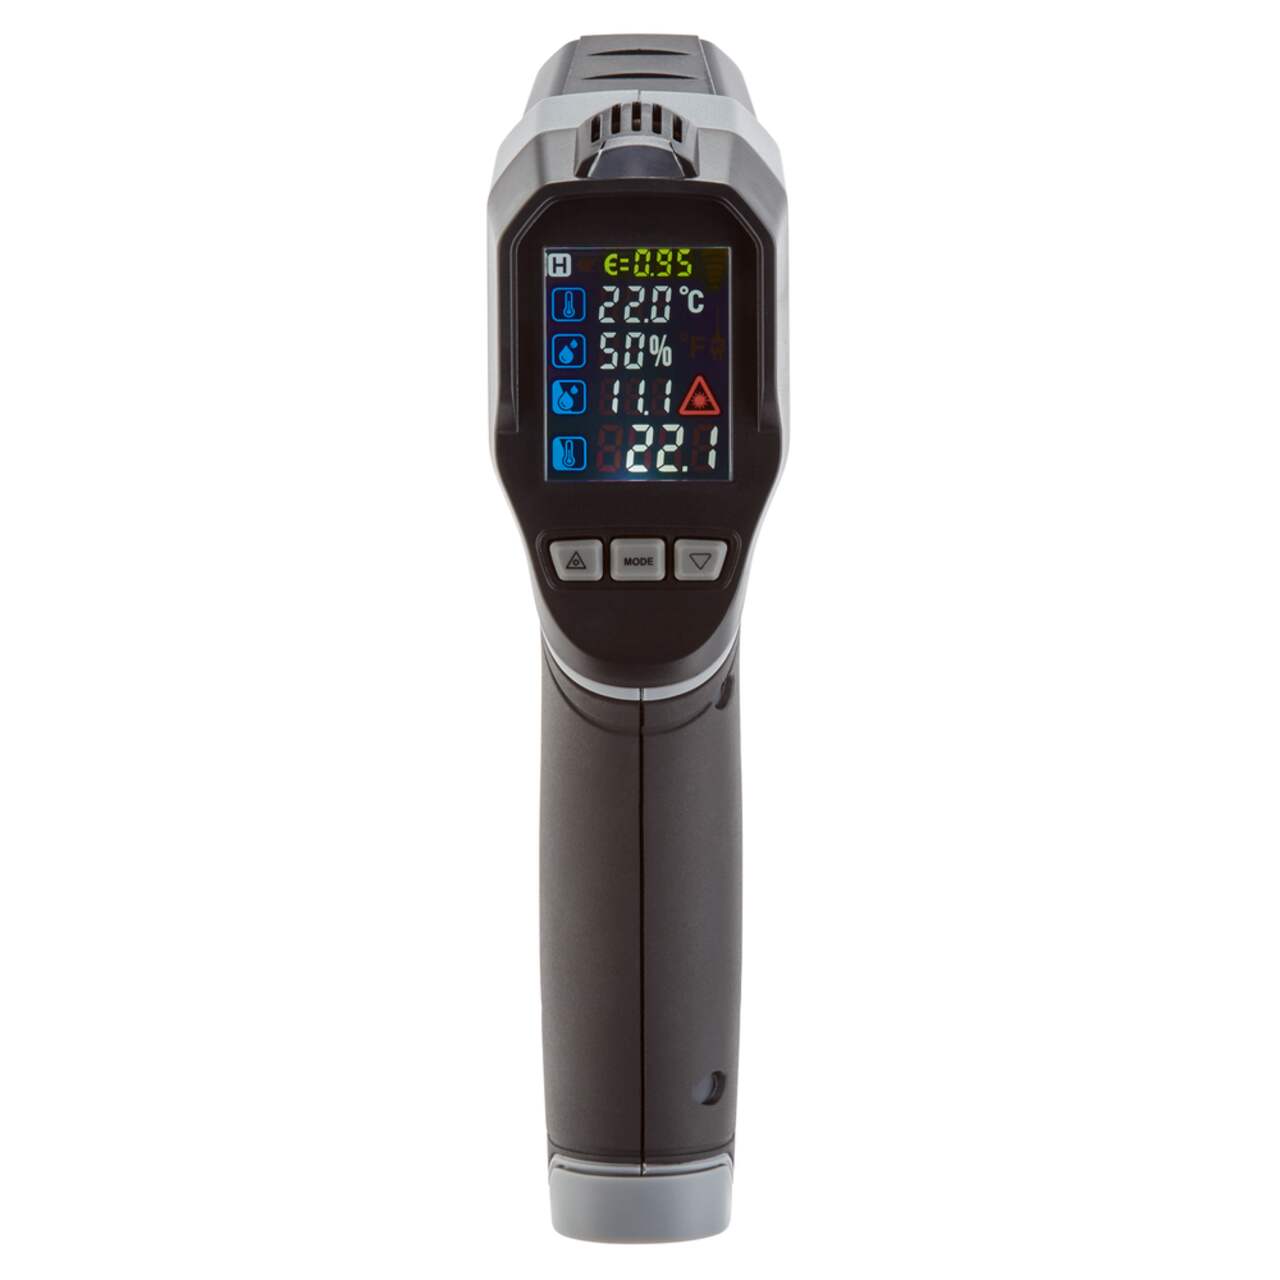 https://media-www.canadiantire.ca/product/fixing/tools/cutting-measuring/0574663/maximum-infrared-thermometer-w-mildew-alarm-27f977d3-11fb-4f1b-9731-4385399d26af.png?imdensity=1&imwidth=1244&impolicy=mZoom